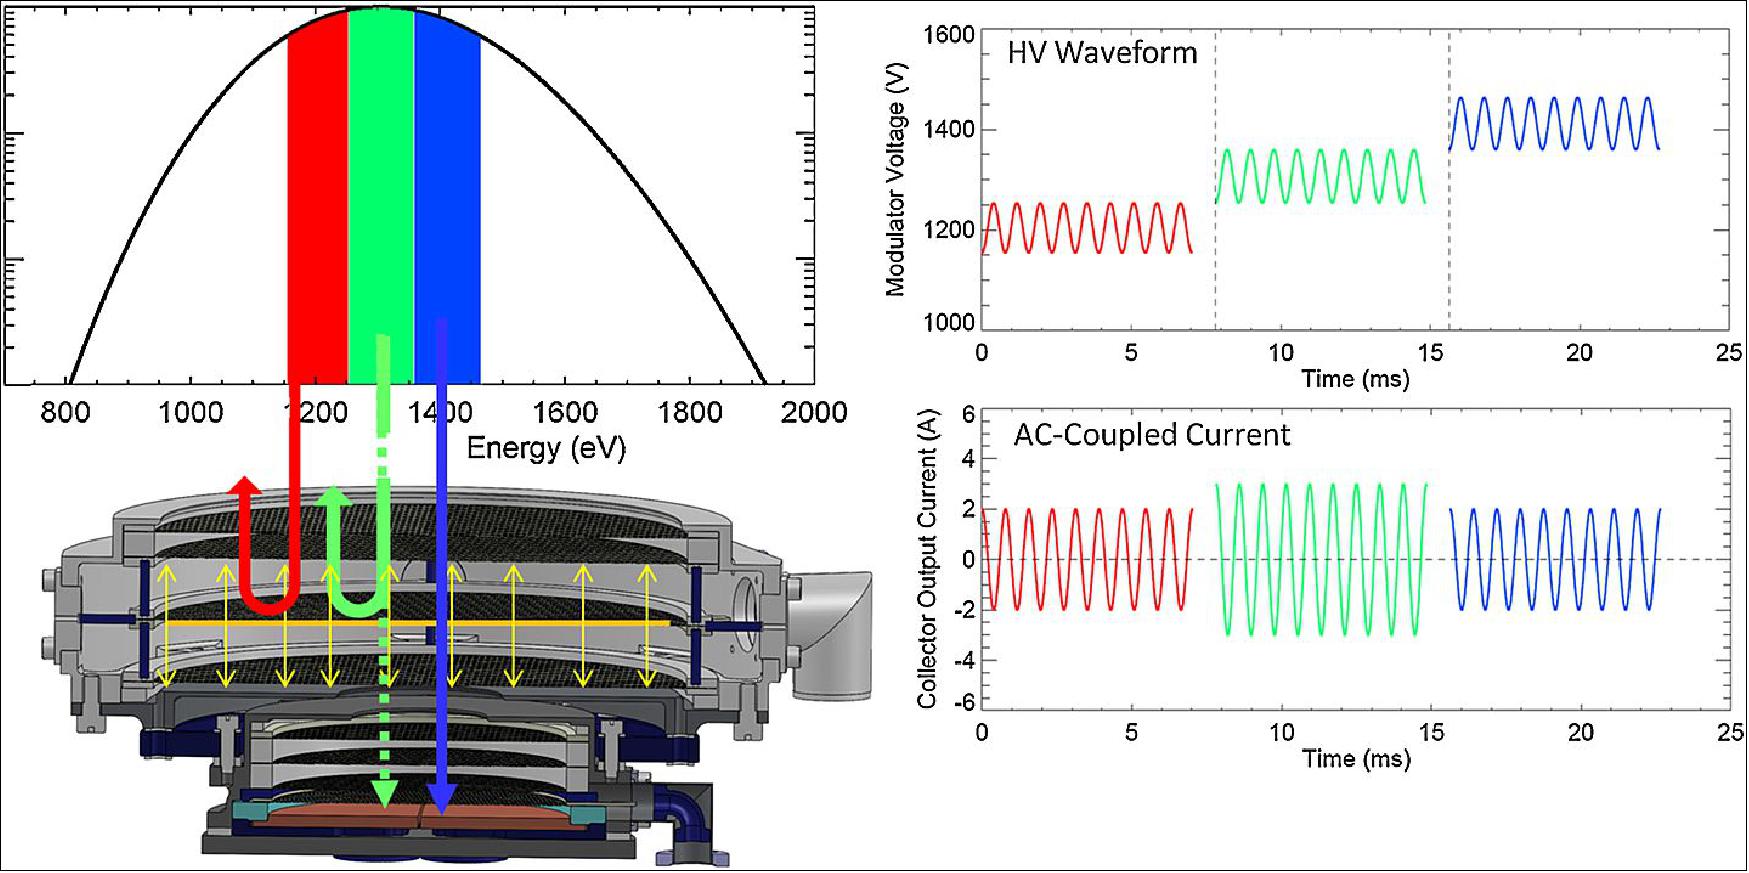 Figure 71: Upper-left: a distribution function showing three voltage windows highlighted in different colors. Lower-left: Cross-section of FSU (Faraday cup Sensor Unit). The upper-section with a larger diameter is the ‘modulator assembly’ with the high-voltage modulator grid highlighted in orange. The electric field set up between the modulator grid and the adjacent ground grids is shown as yellow arrows. As the modulator grid in the FSU oscillates between two voltages (upper-right panel), only particles with energy/charge between the voltages produce an AC current on the collector plates (lower-right panel). These currents are amplified and fed to a synchronous detection circuit (image credit: SWEAP collaboration)